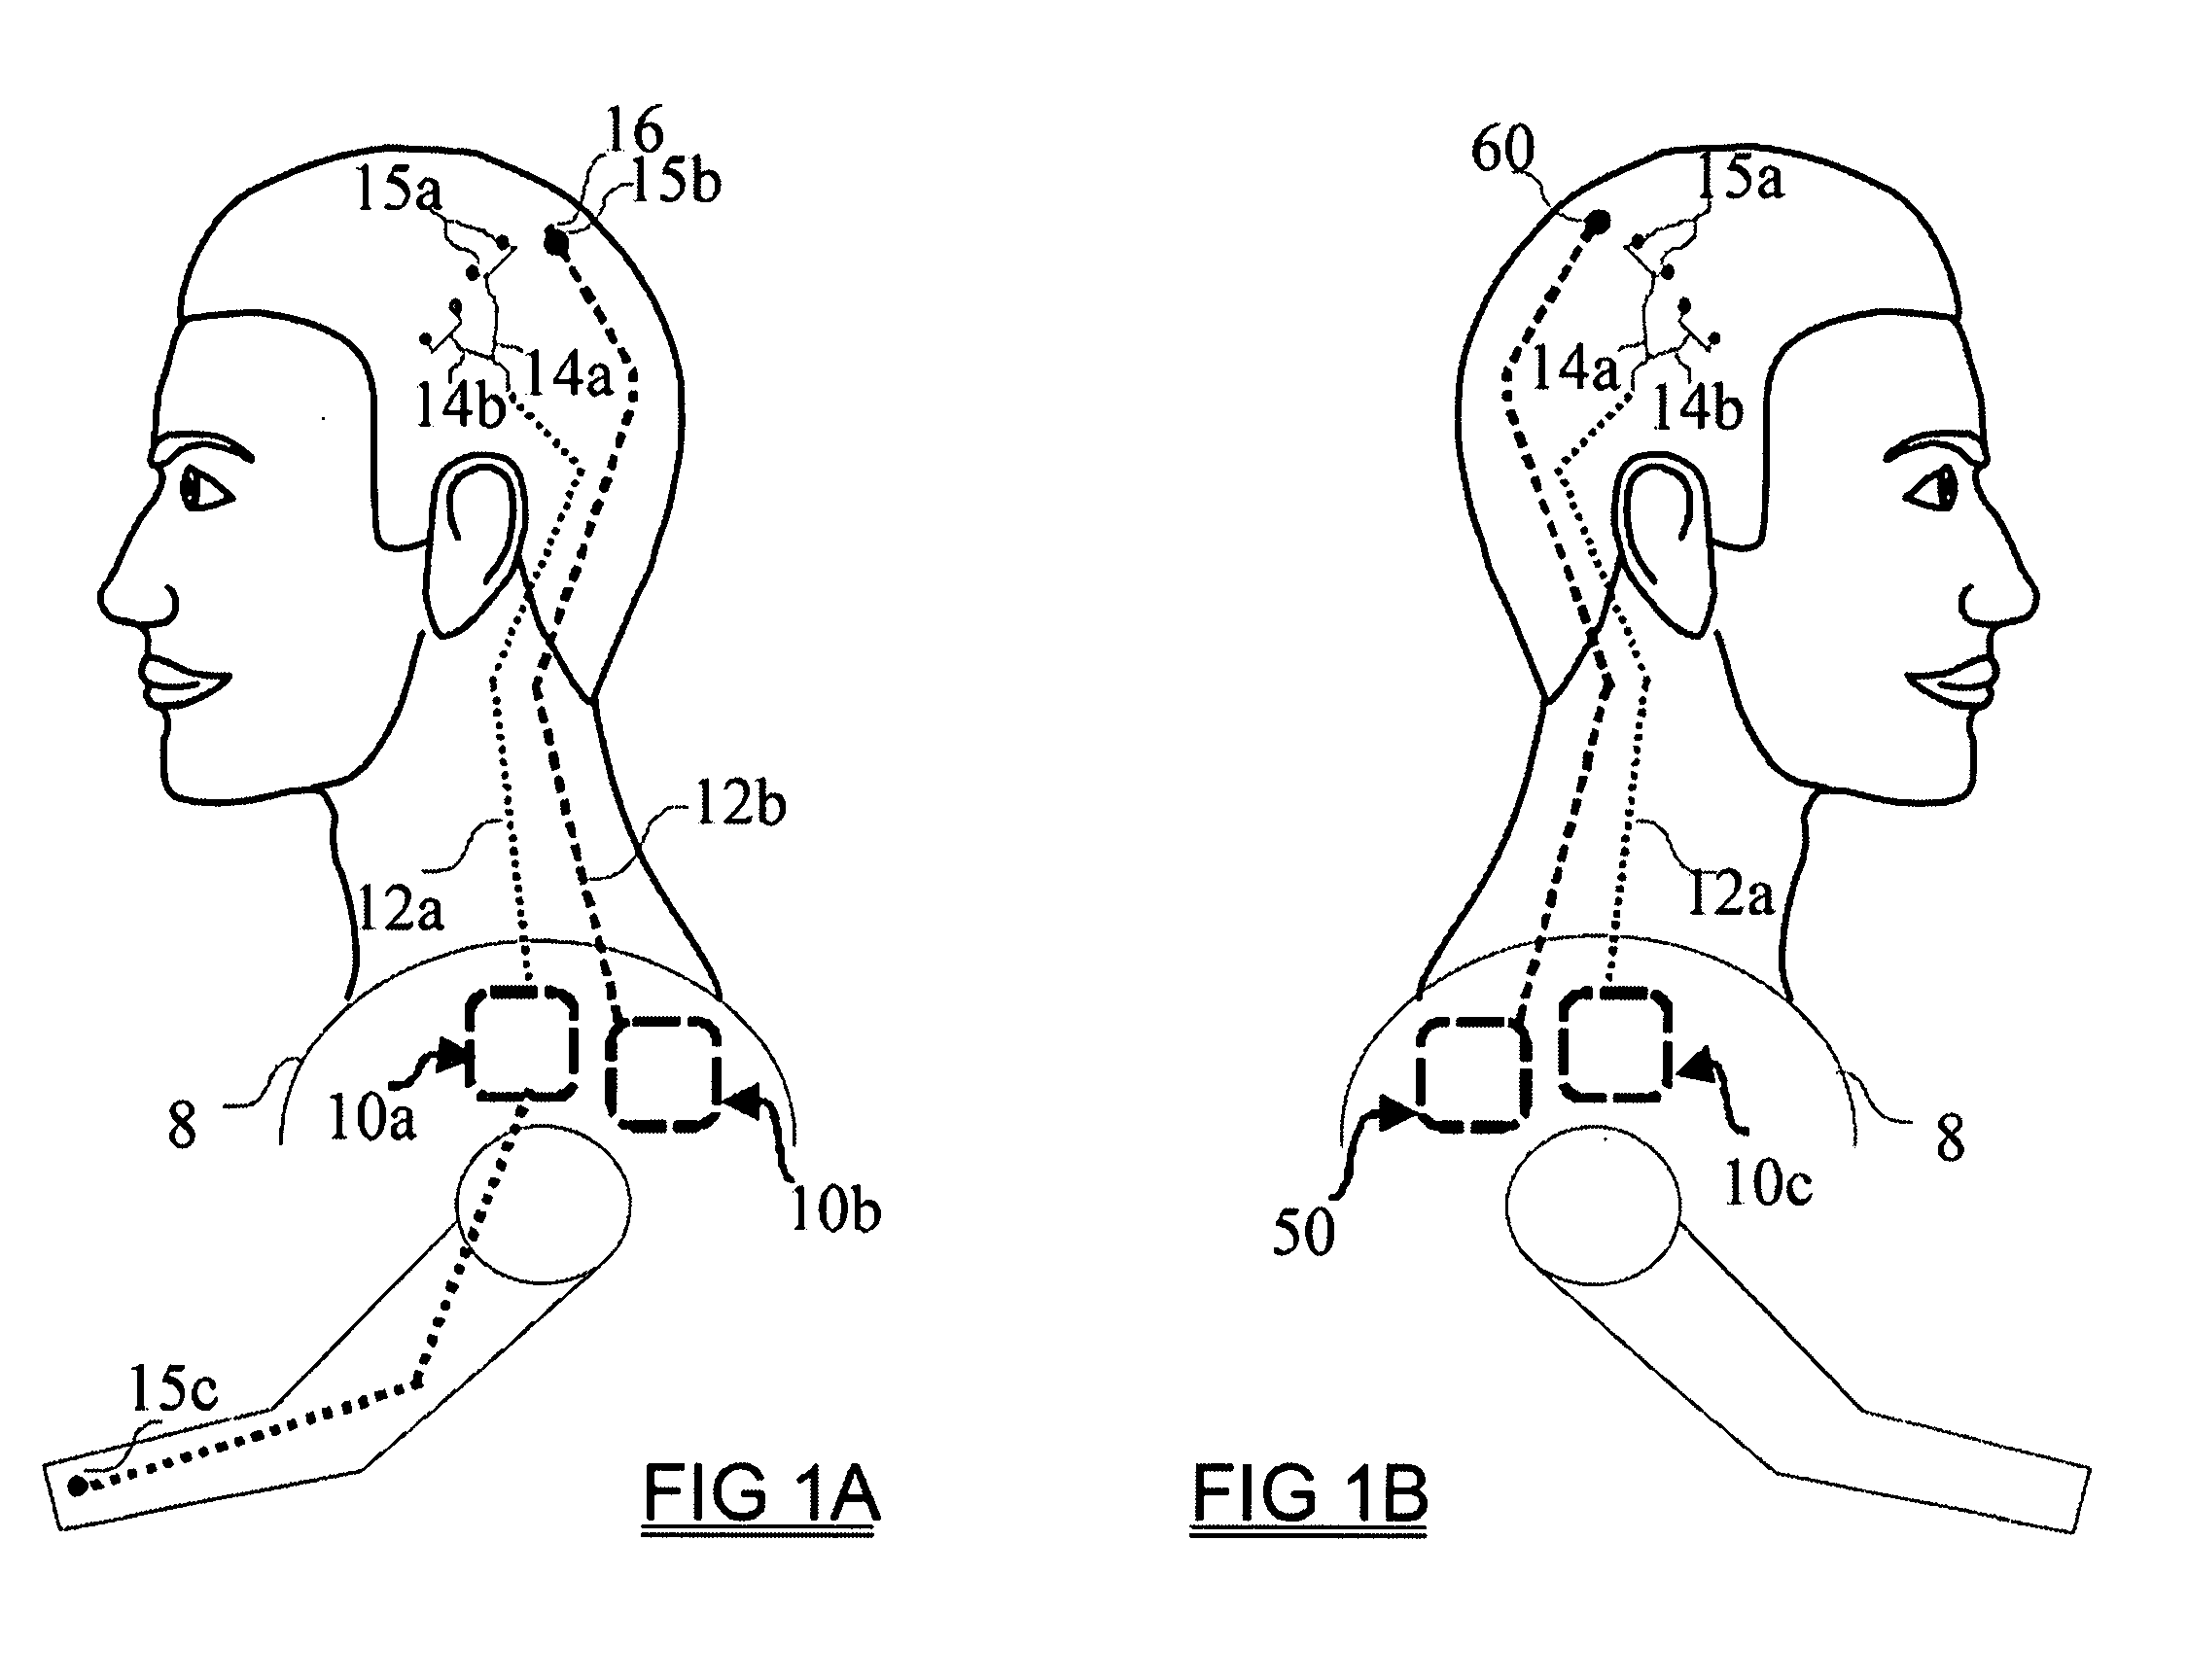 Methods and Systems for semi-automatic adjustment of medical monitoring and treatment